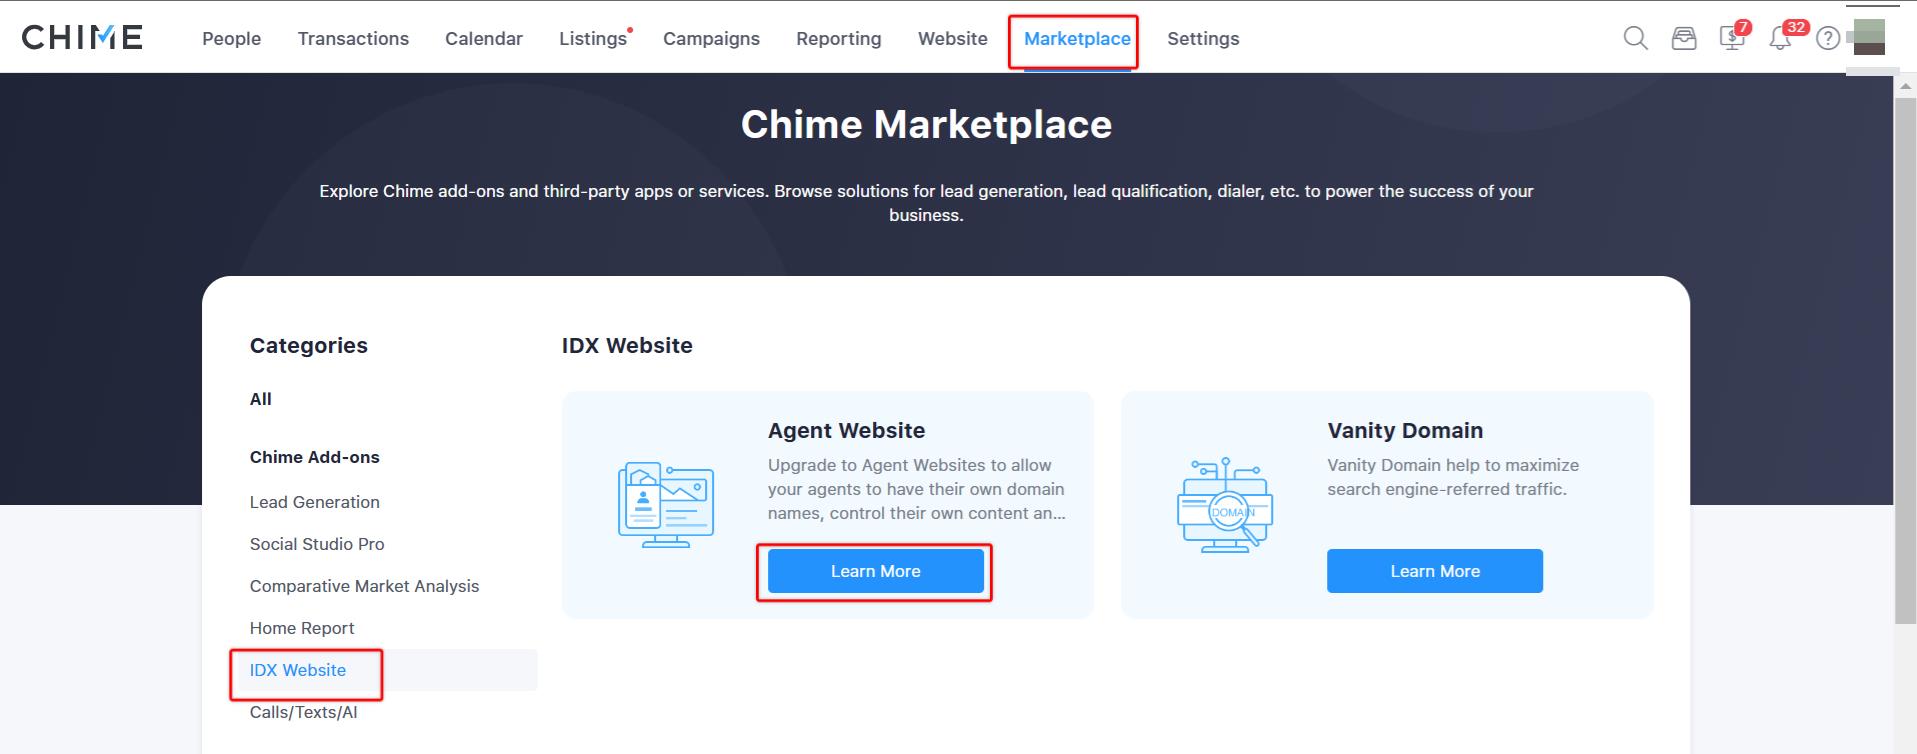 Marketplace___Chime_and_3_more_pages_-__InPrivate__-_Microsoft__Edge_2023-03-10_at_4.52.15_AM.jpeg